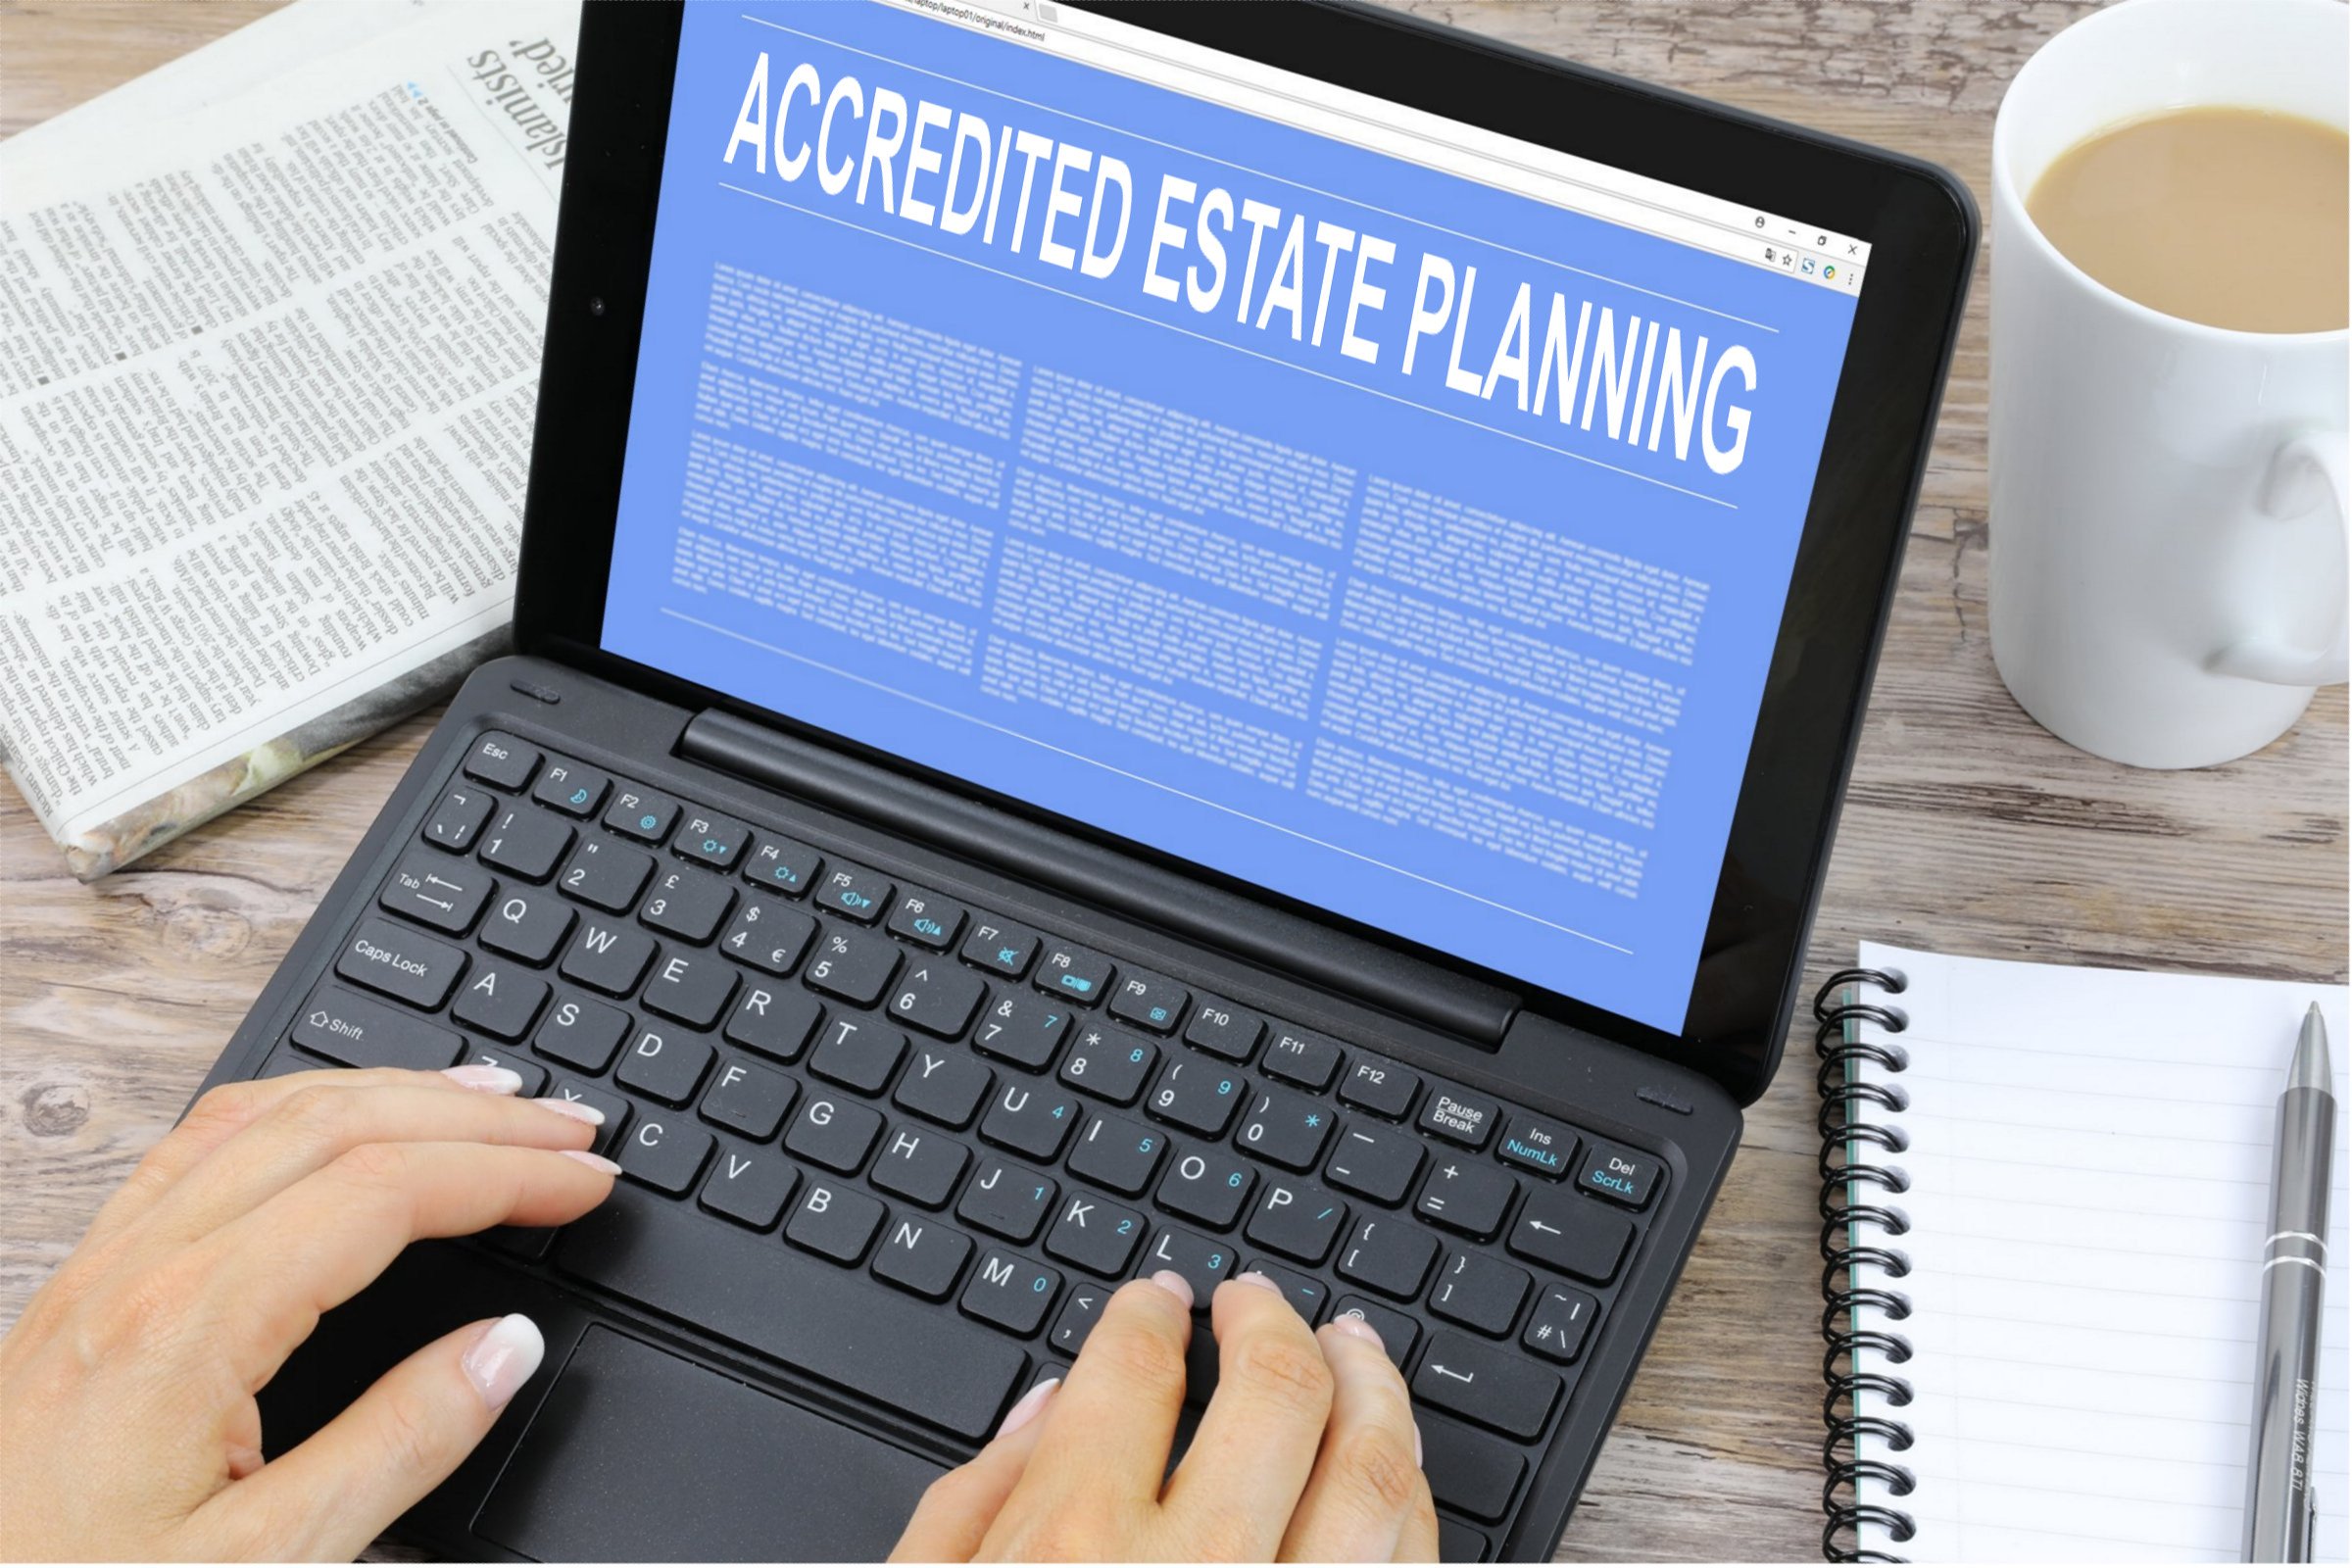 Accredited Estate Planning